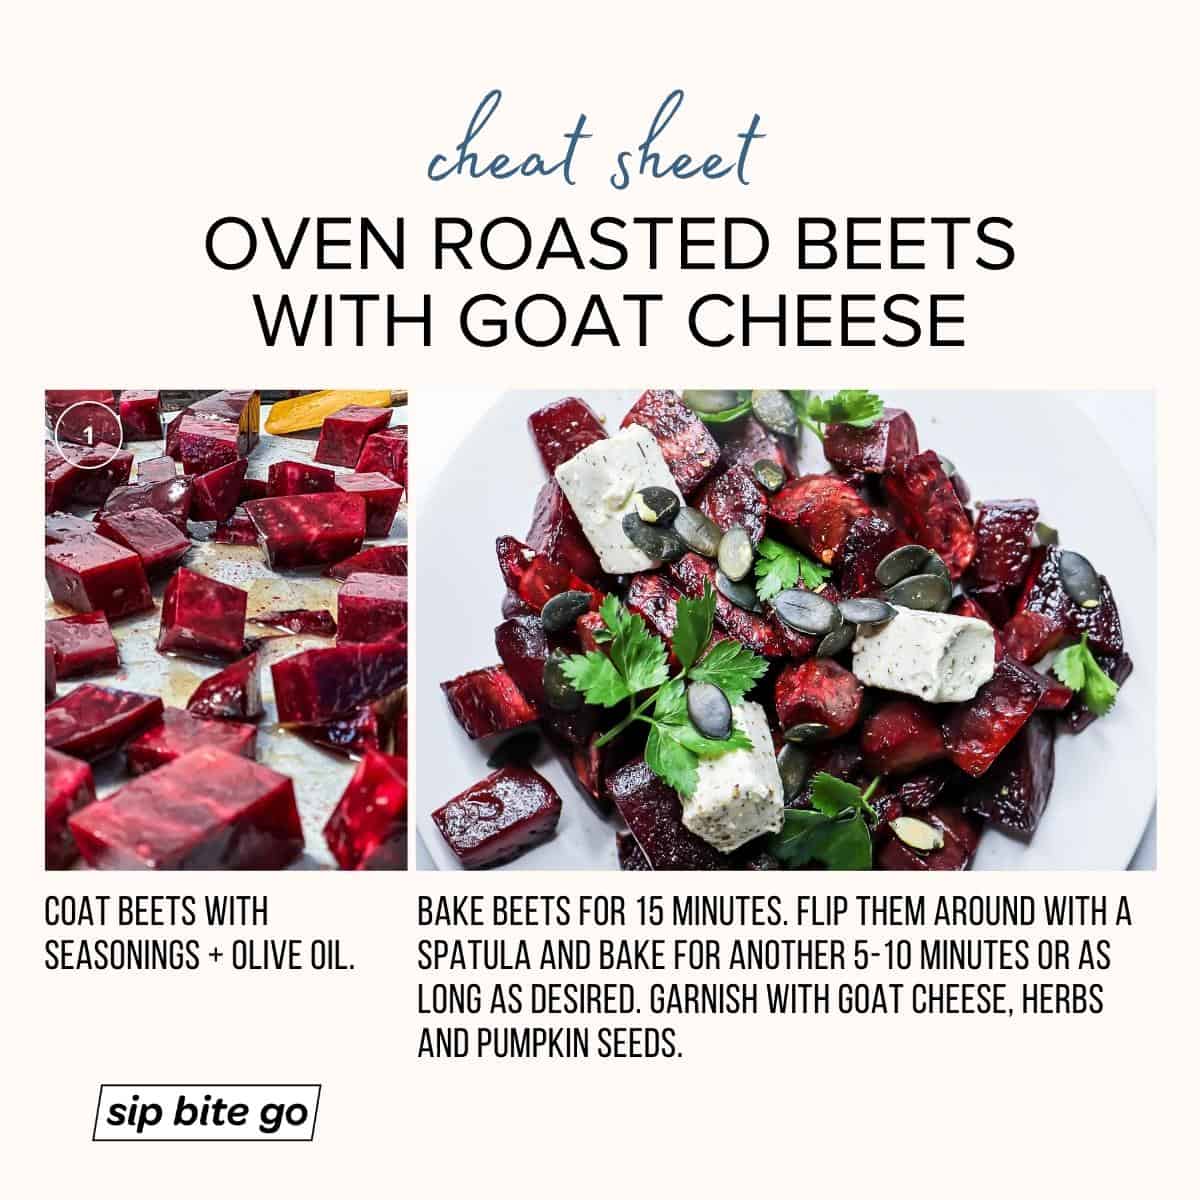 Infographic demonstrating how to roast beets in oven for salad with goat cheese